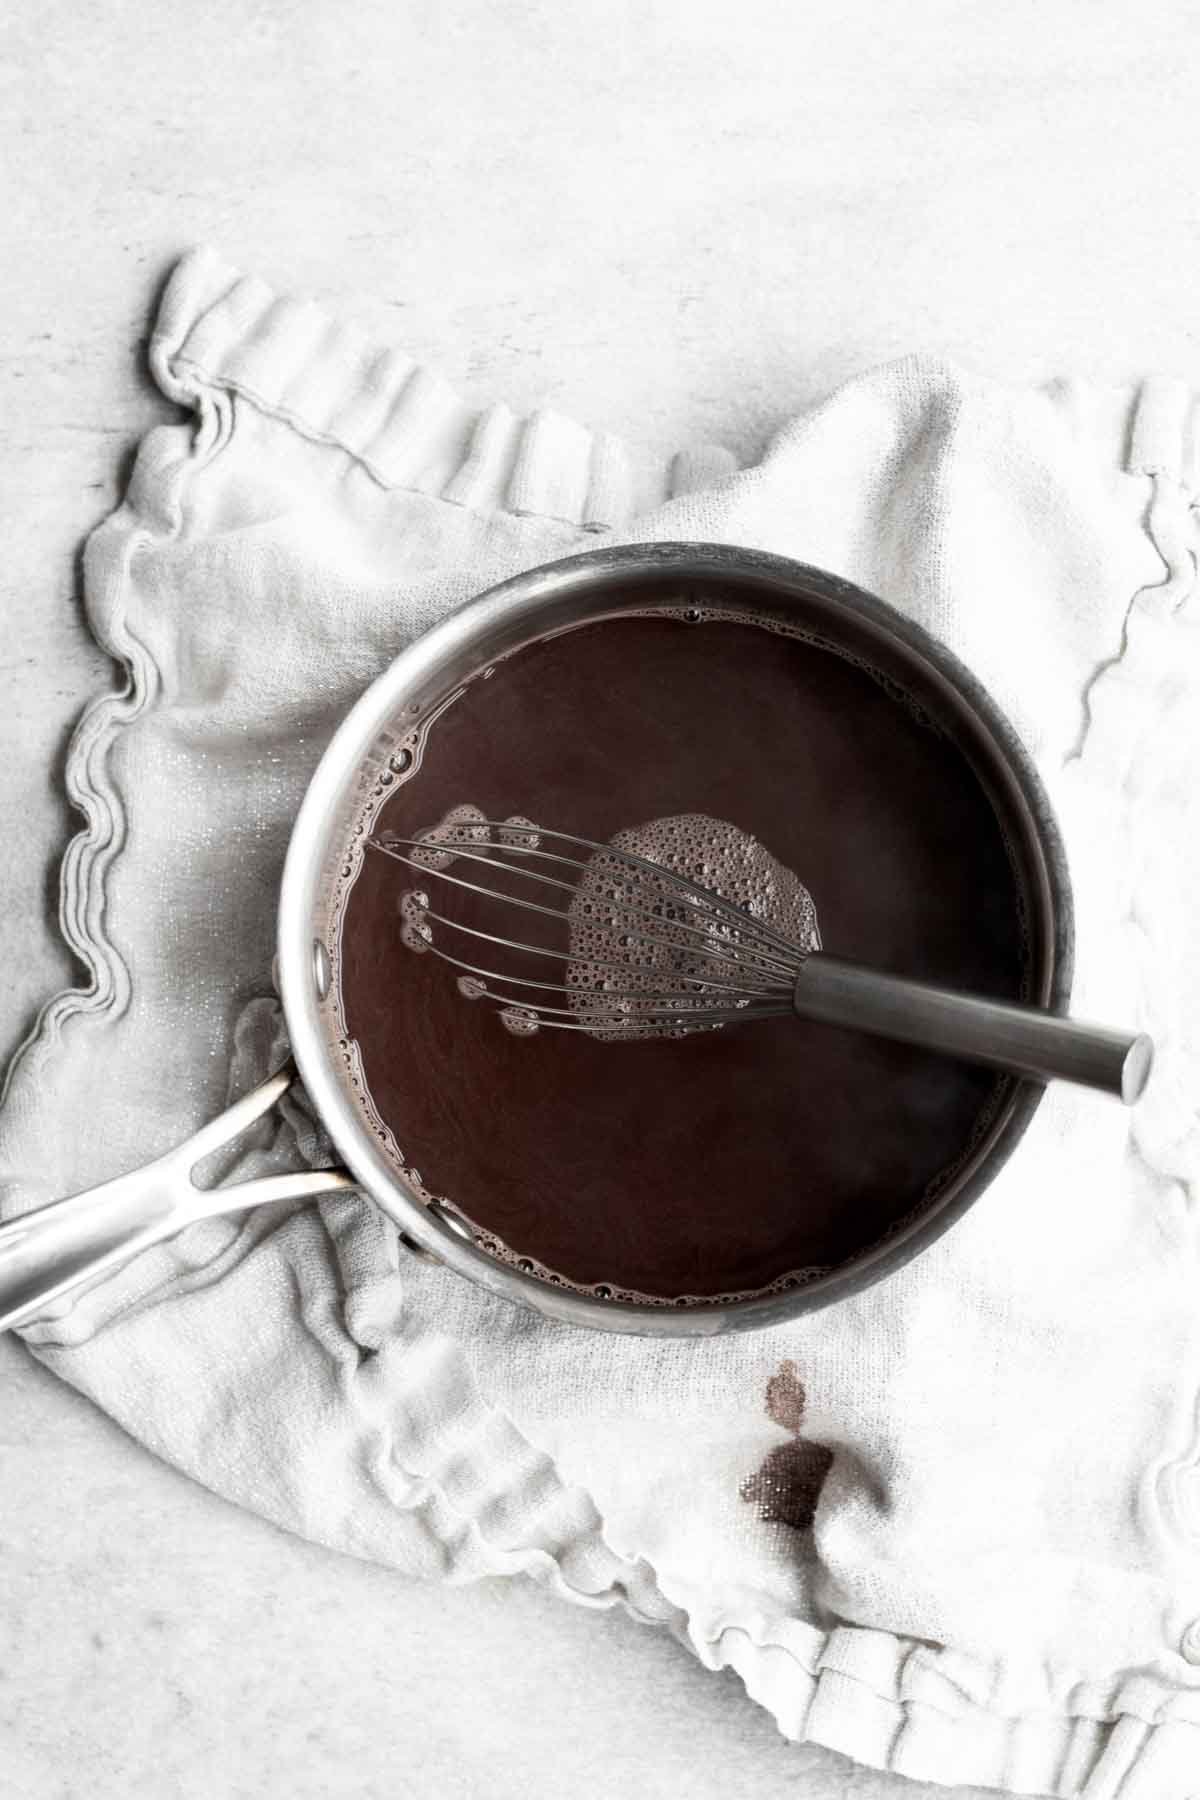 Whisking together water and cocoa powder.